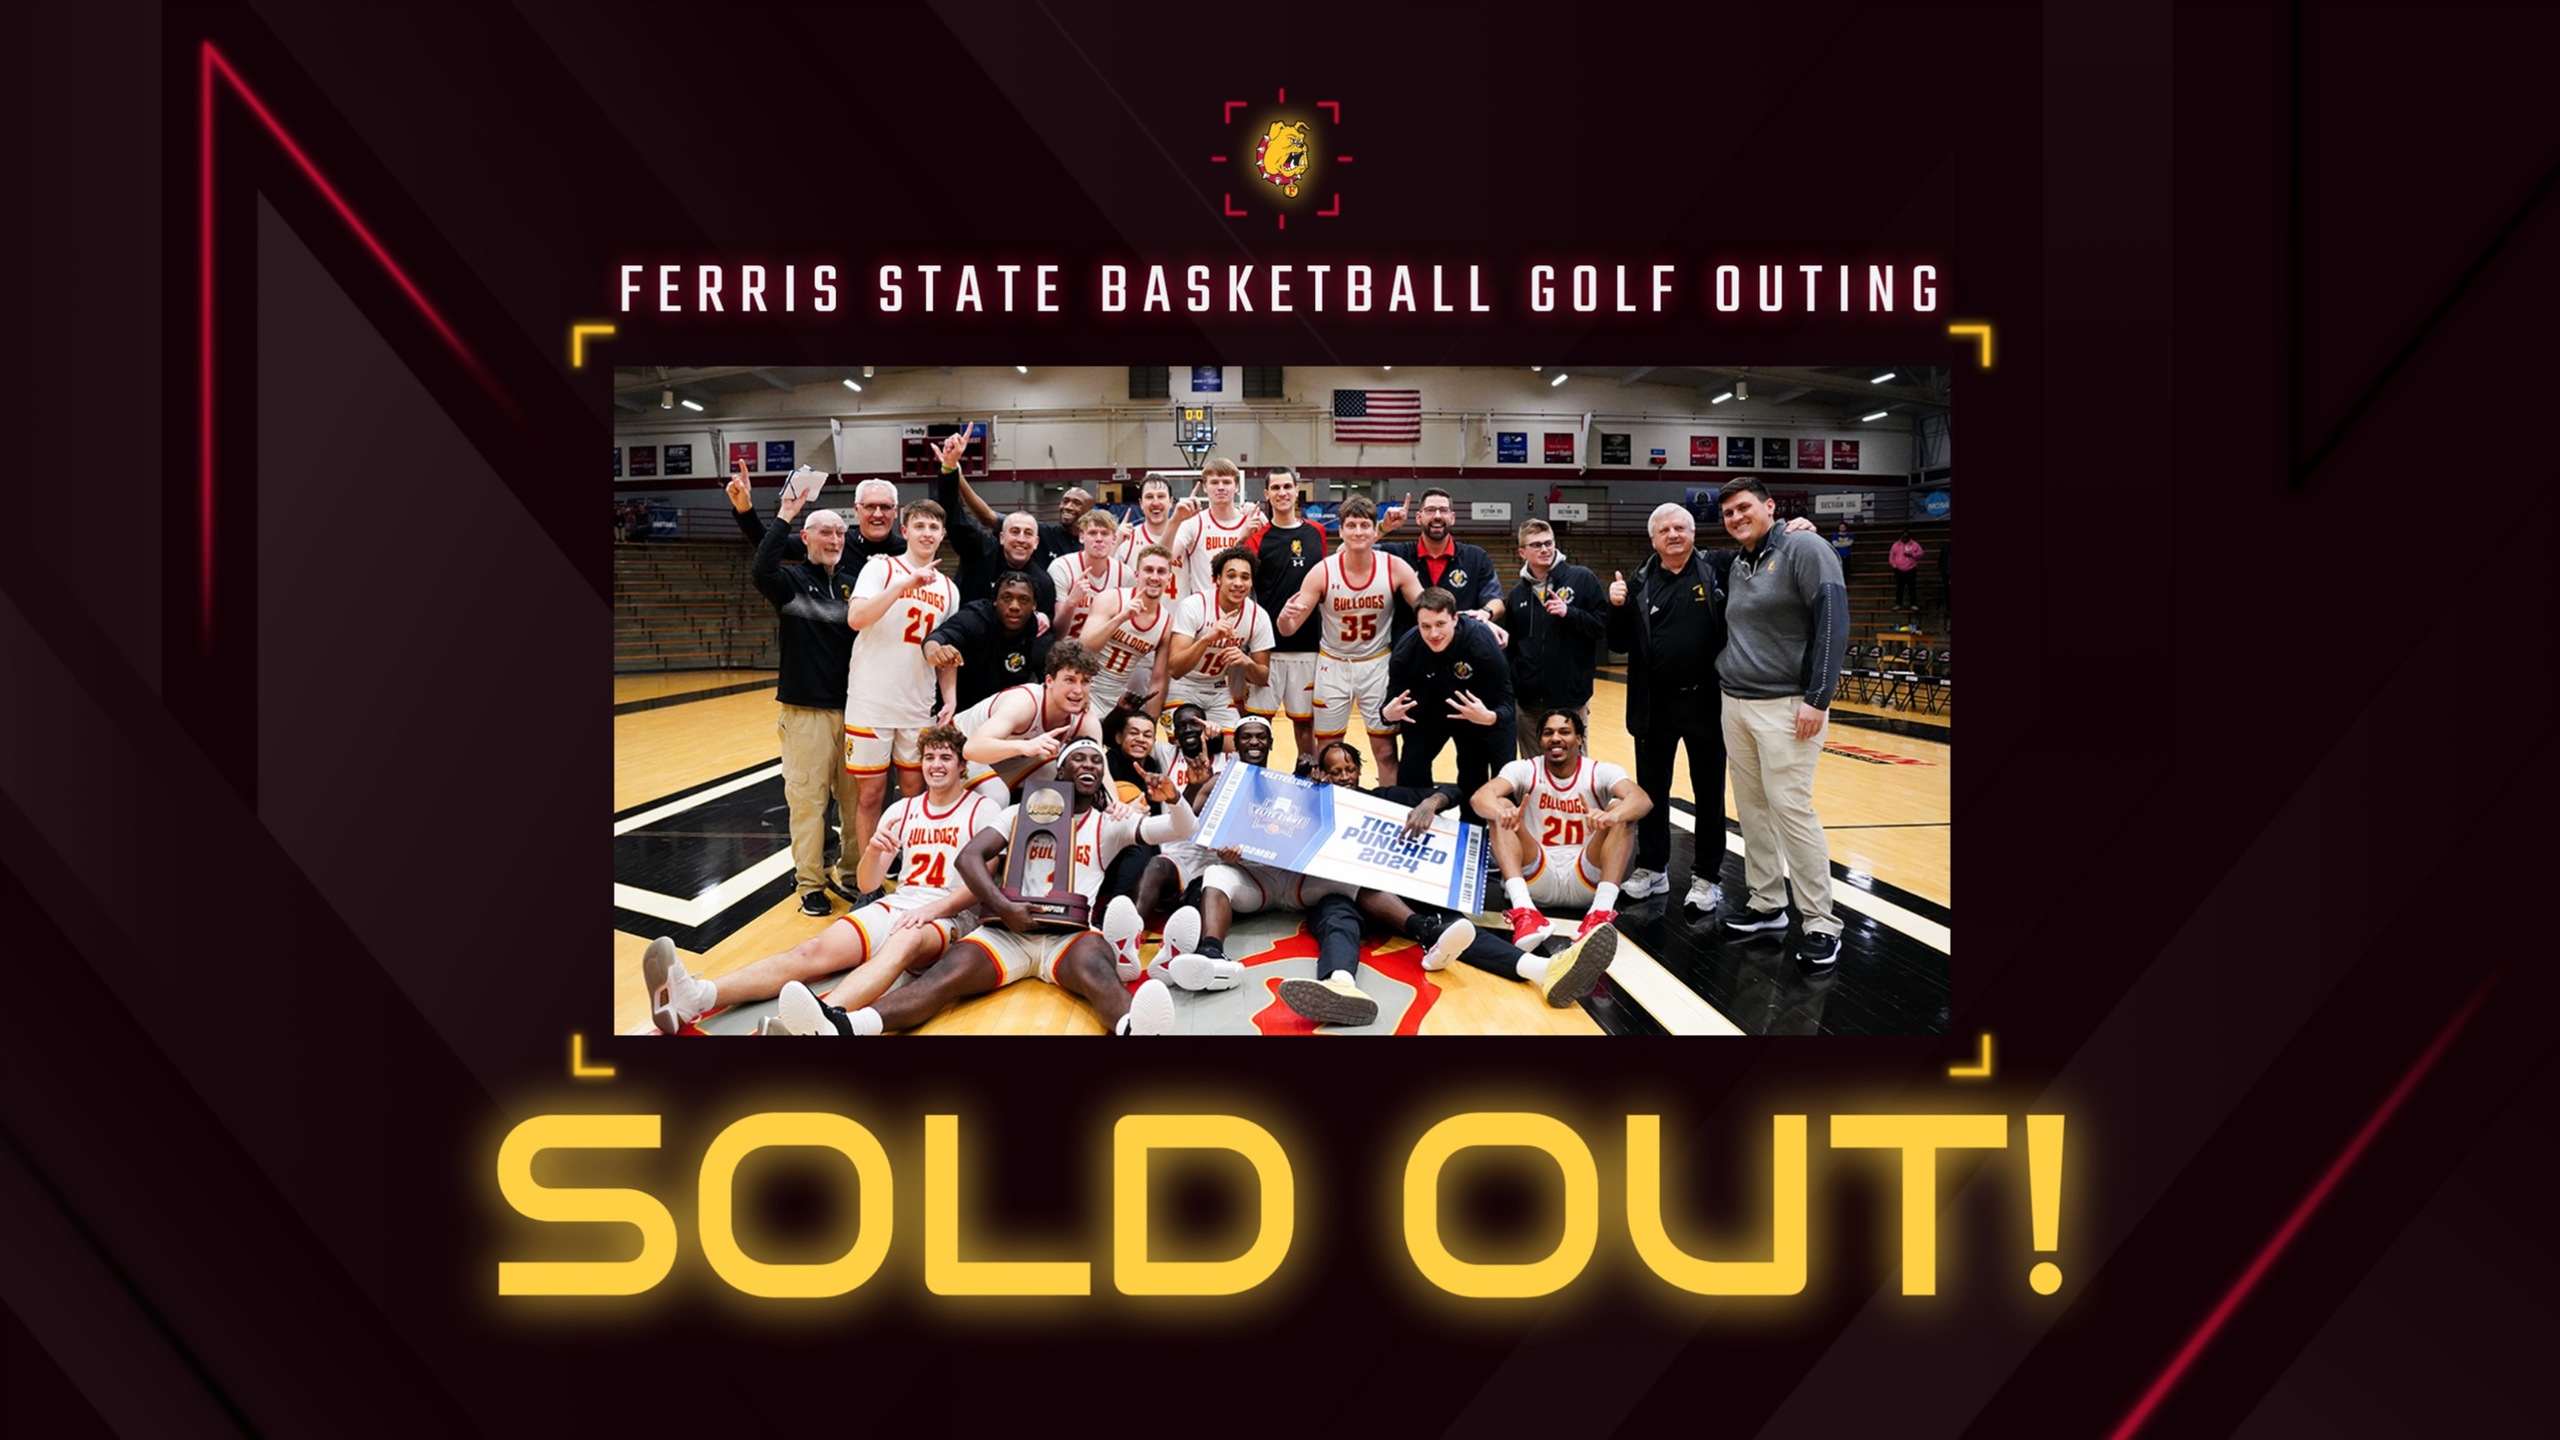 SOLD OUT! This Week's Ferris State Men's Basketball Golf Outing Officially Sold Out!